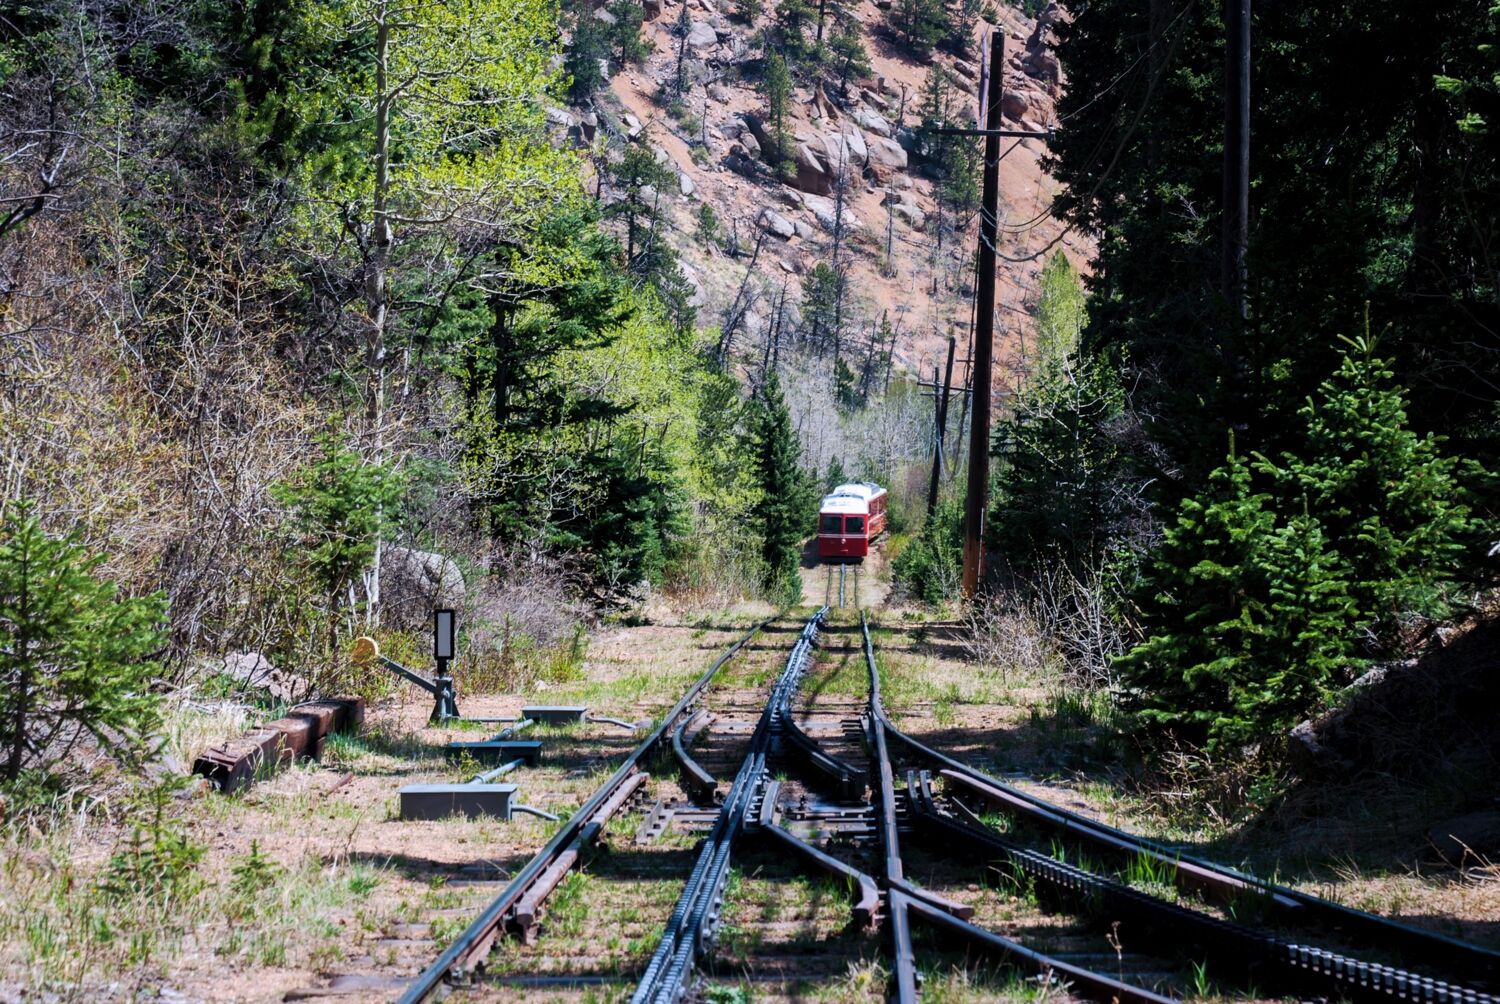 Oh that climb. Working that long climb to the 14,115 ft summit of Pikes Peak. Taken on the Manitou & Pikes Peak Cog railway in...